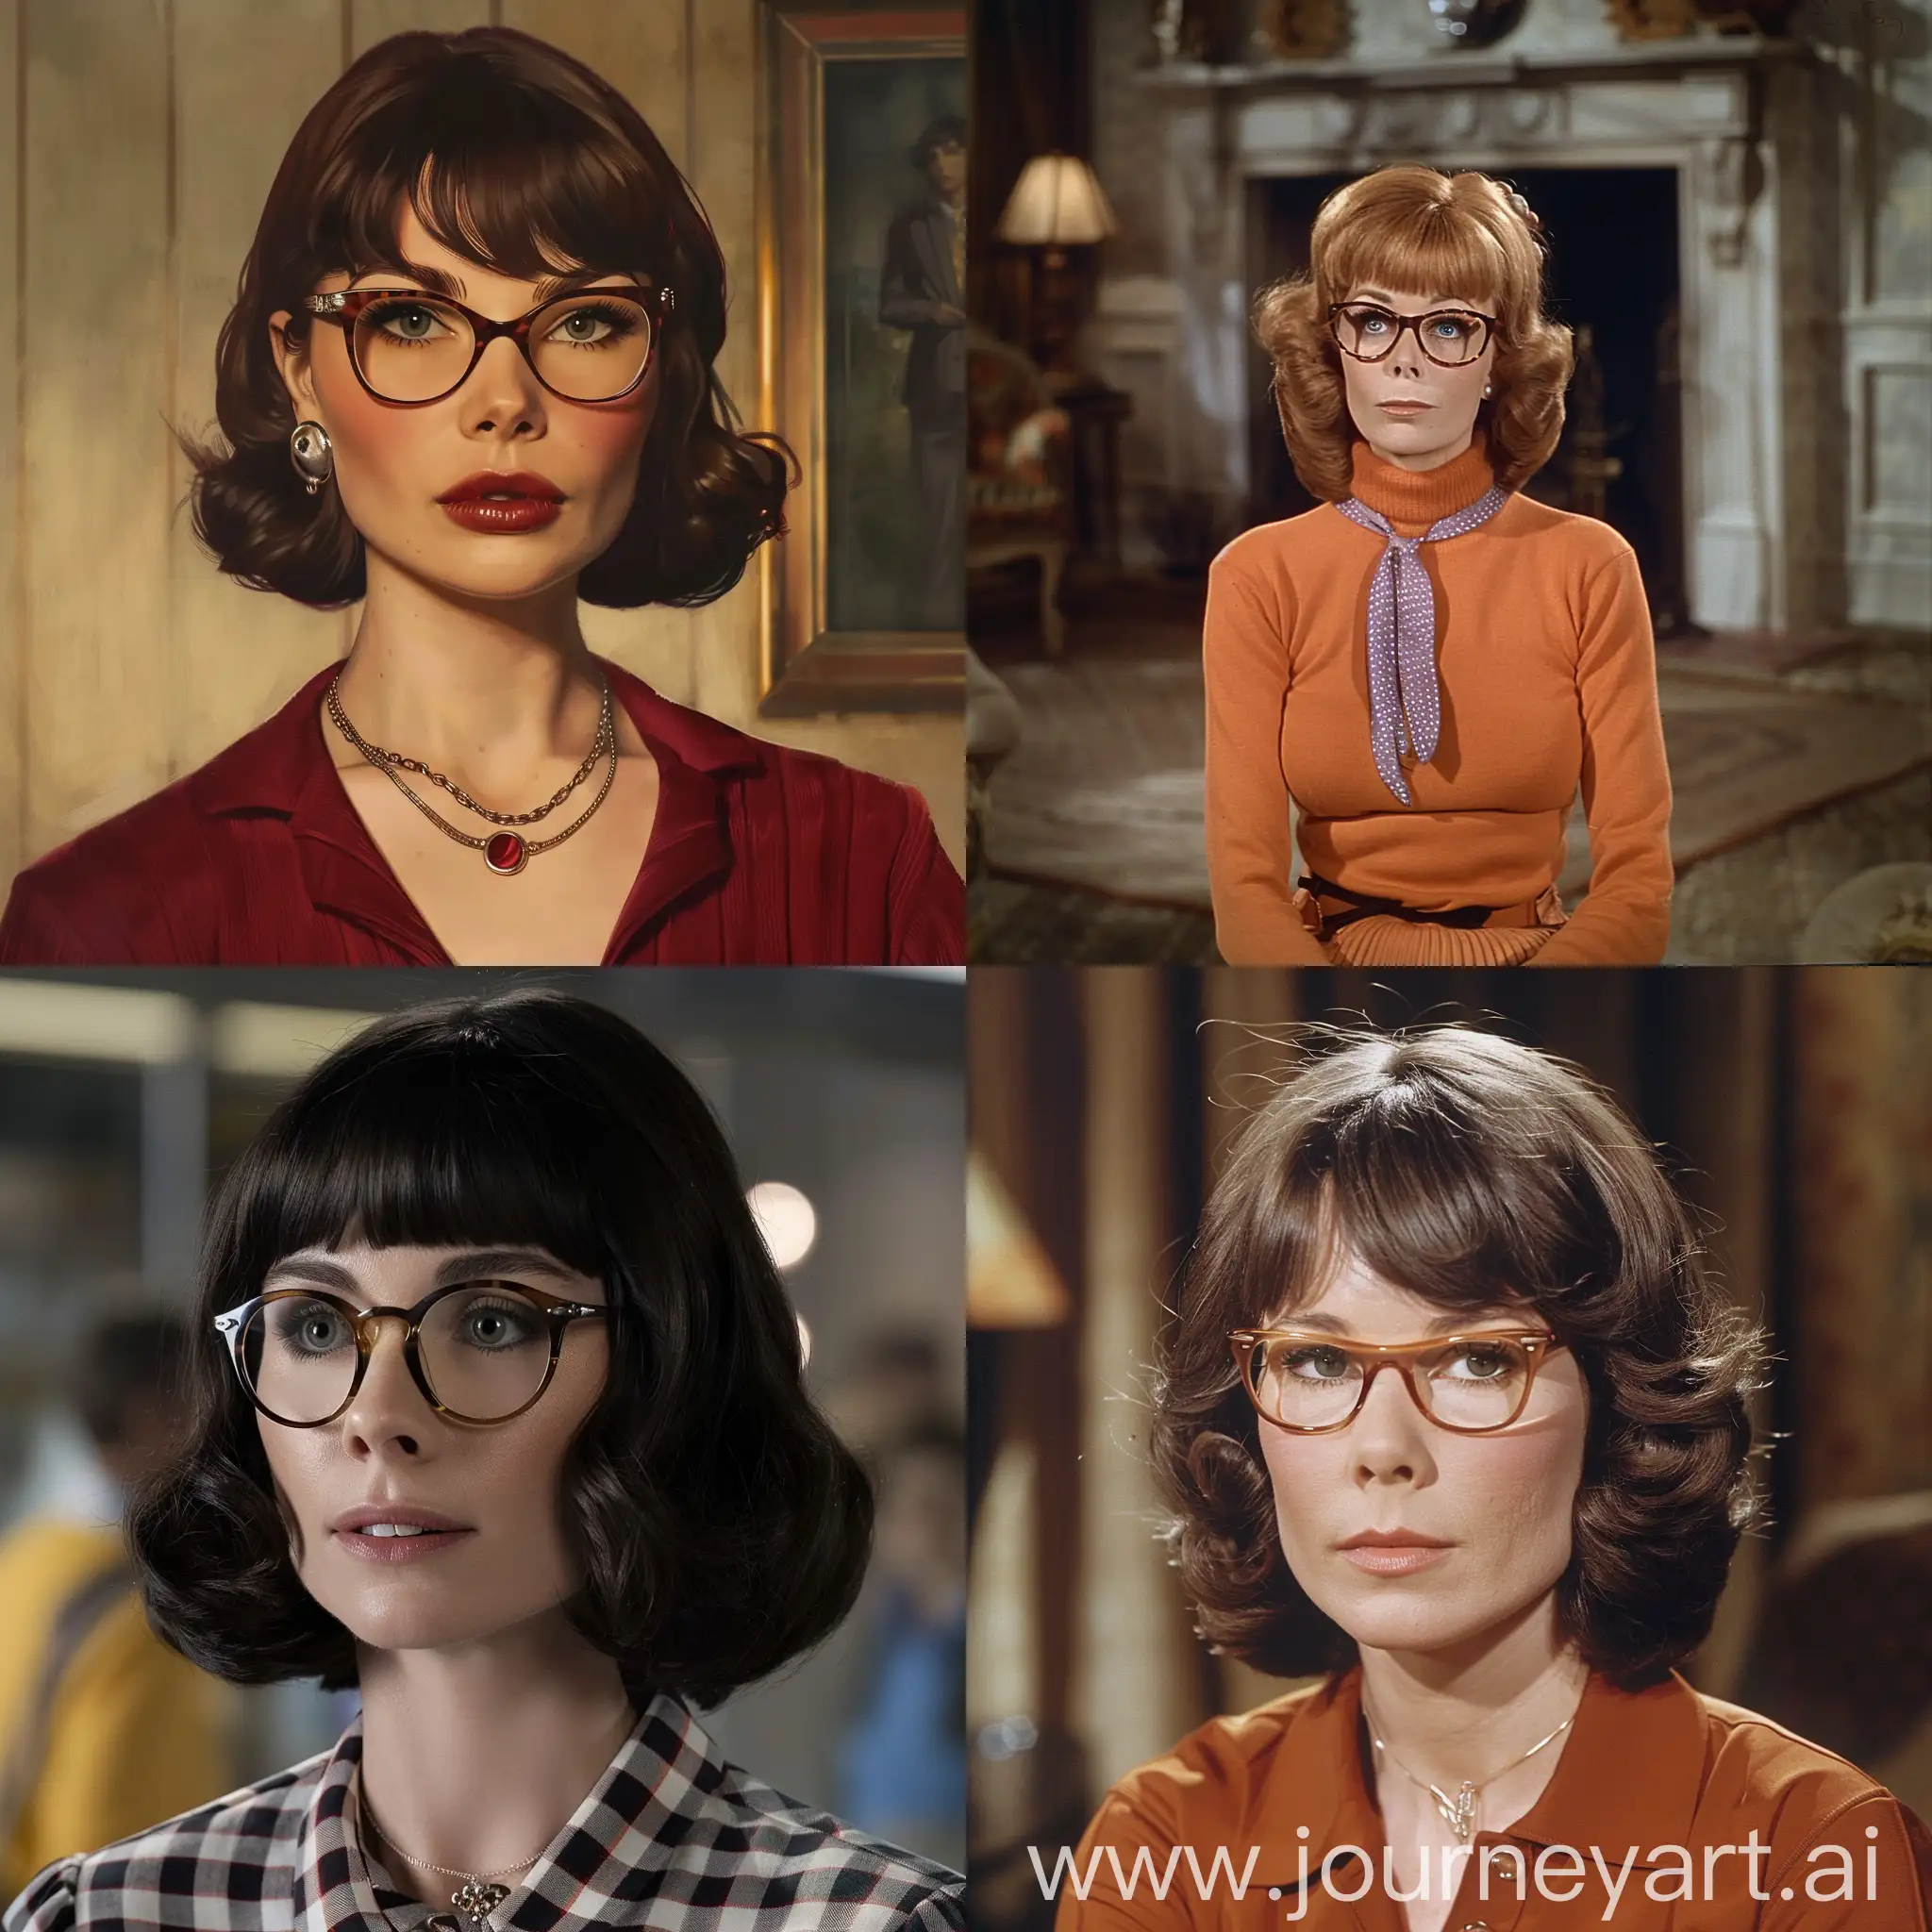 A picture of Velma Dinkley